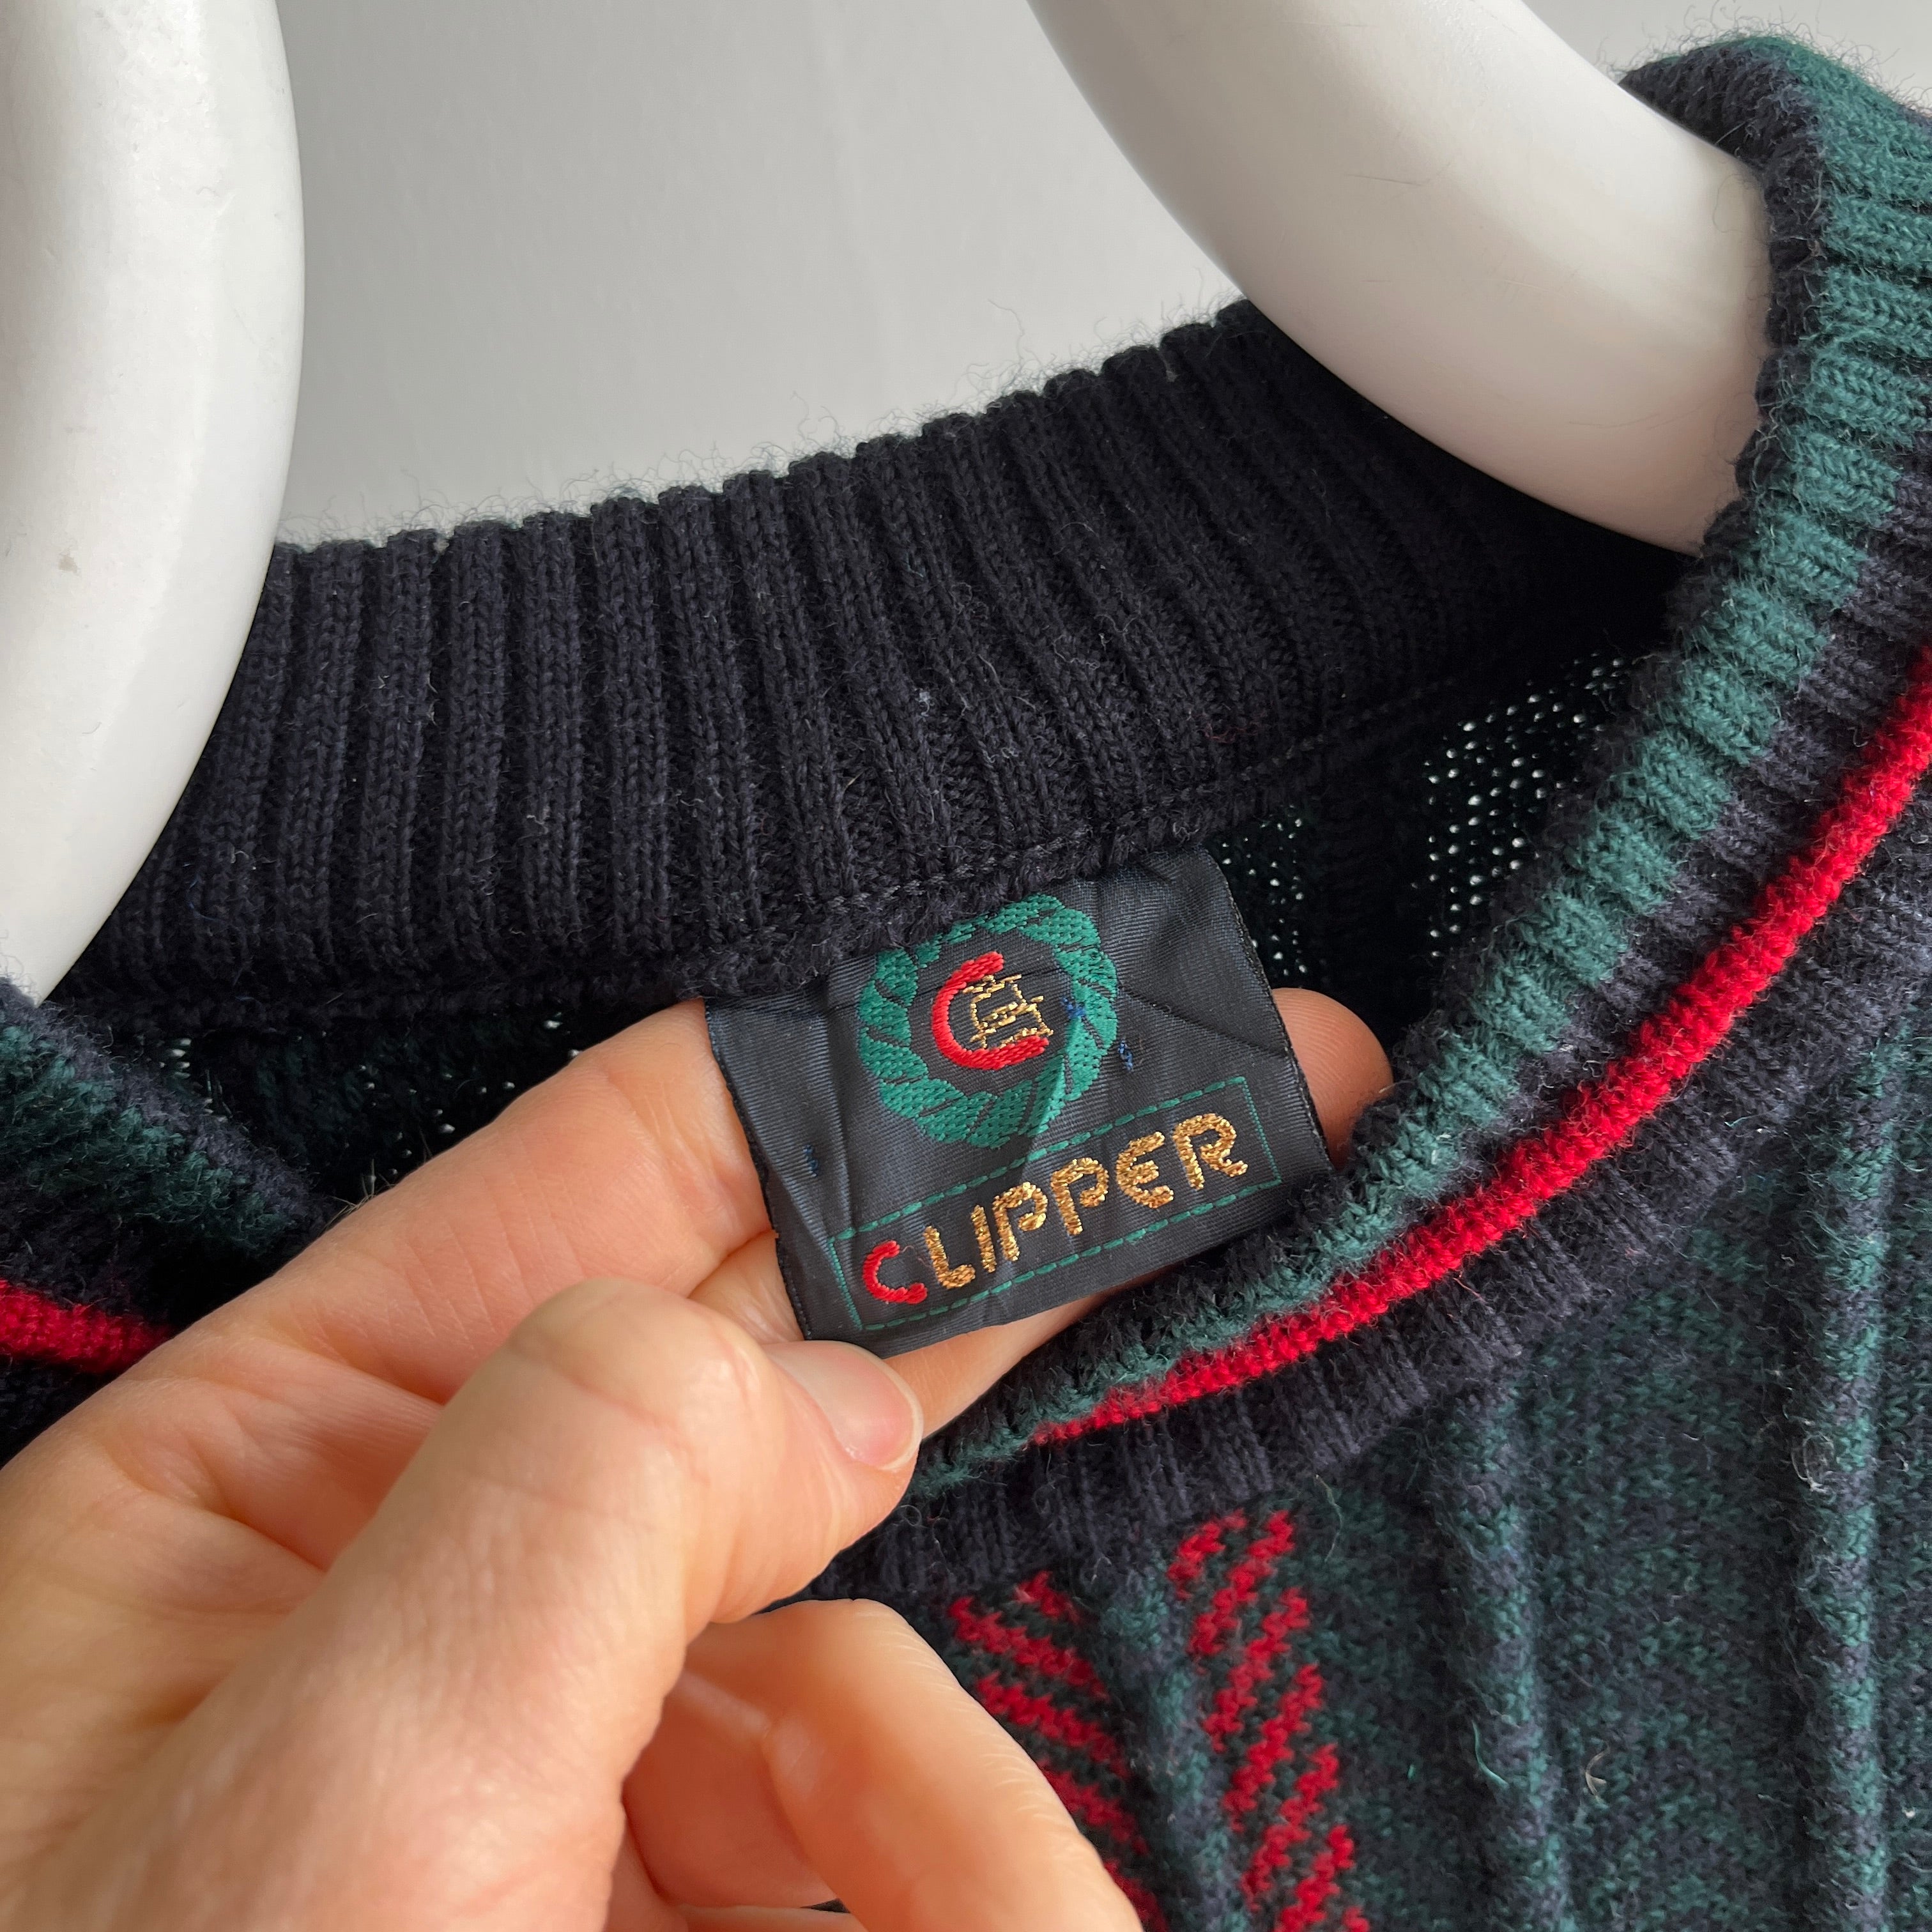 1980s Clipper Knit Sweater - Wool, but not itchy!